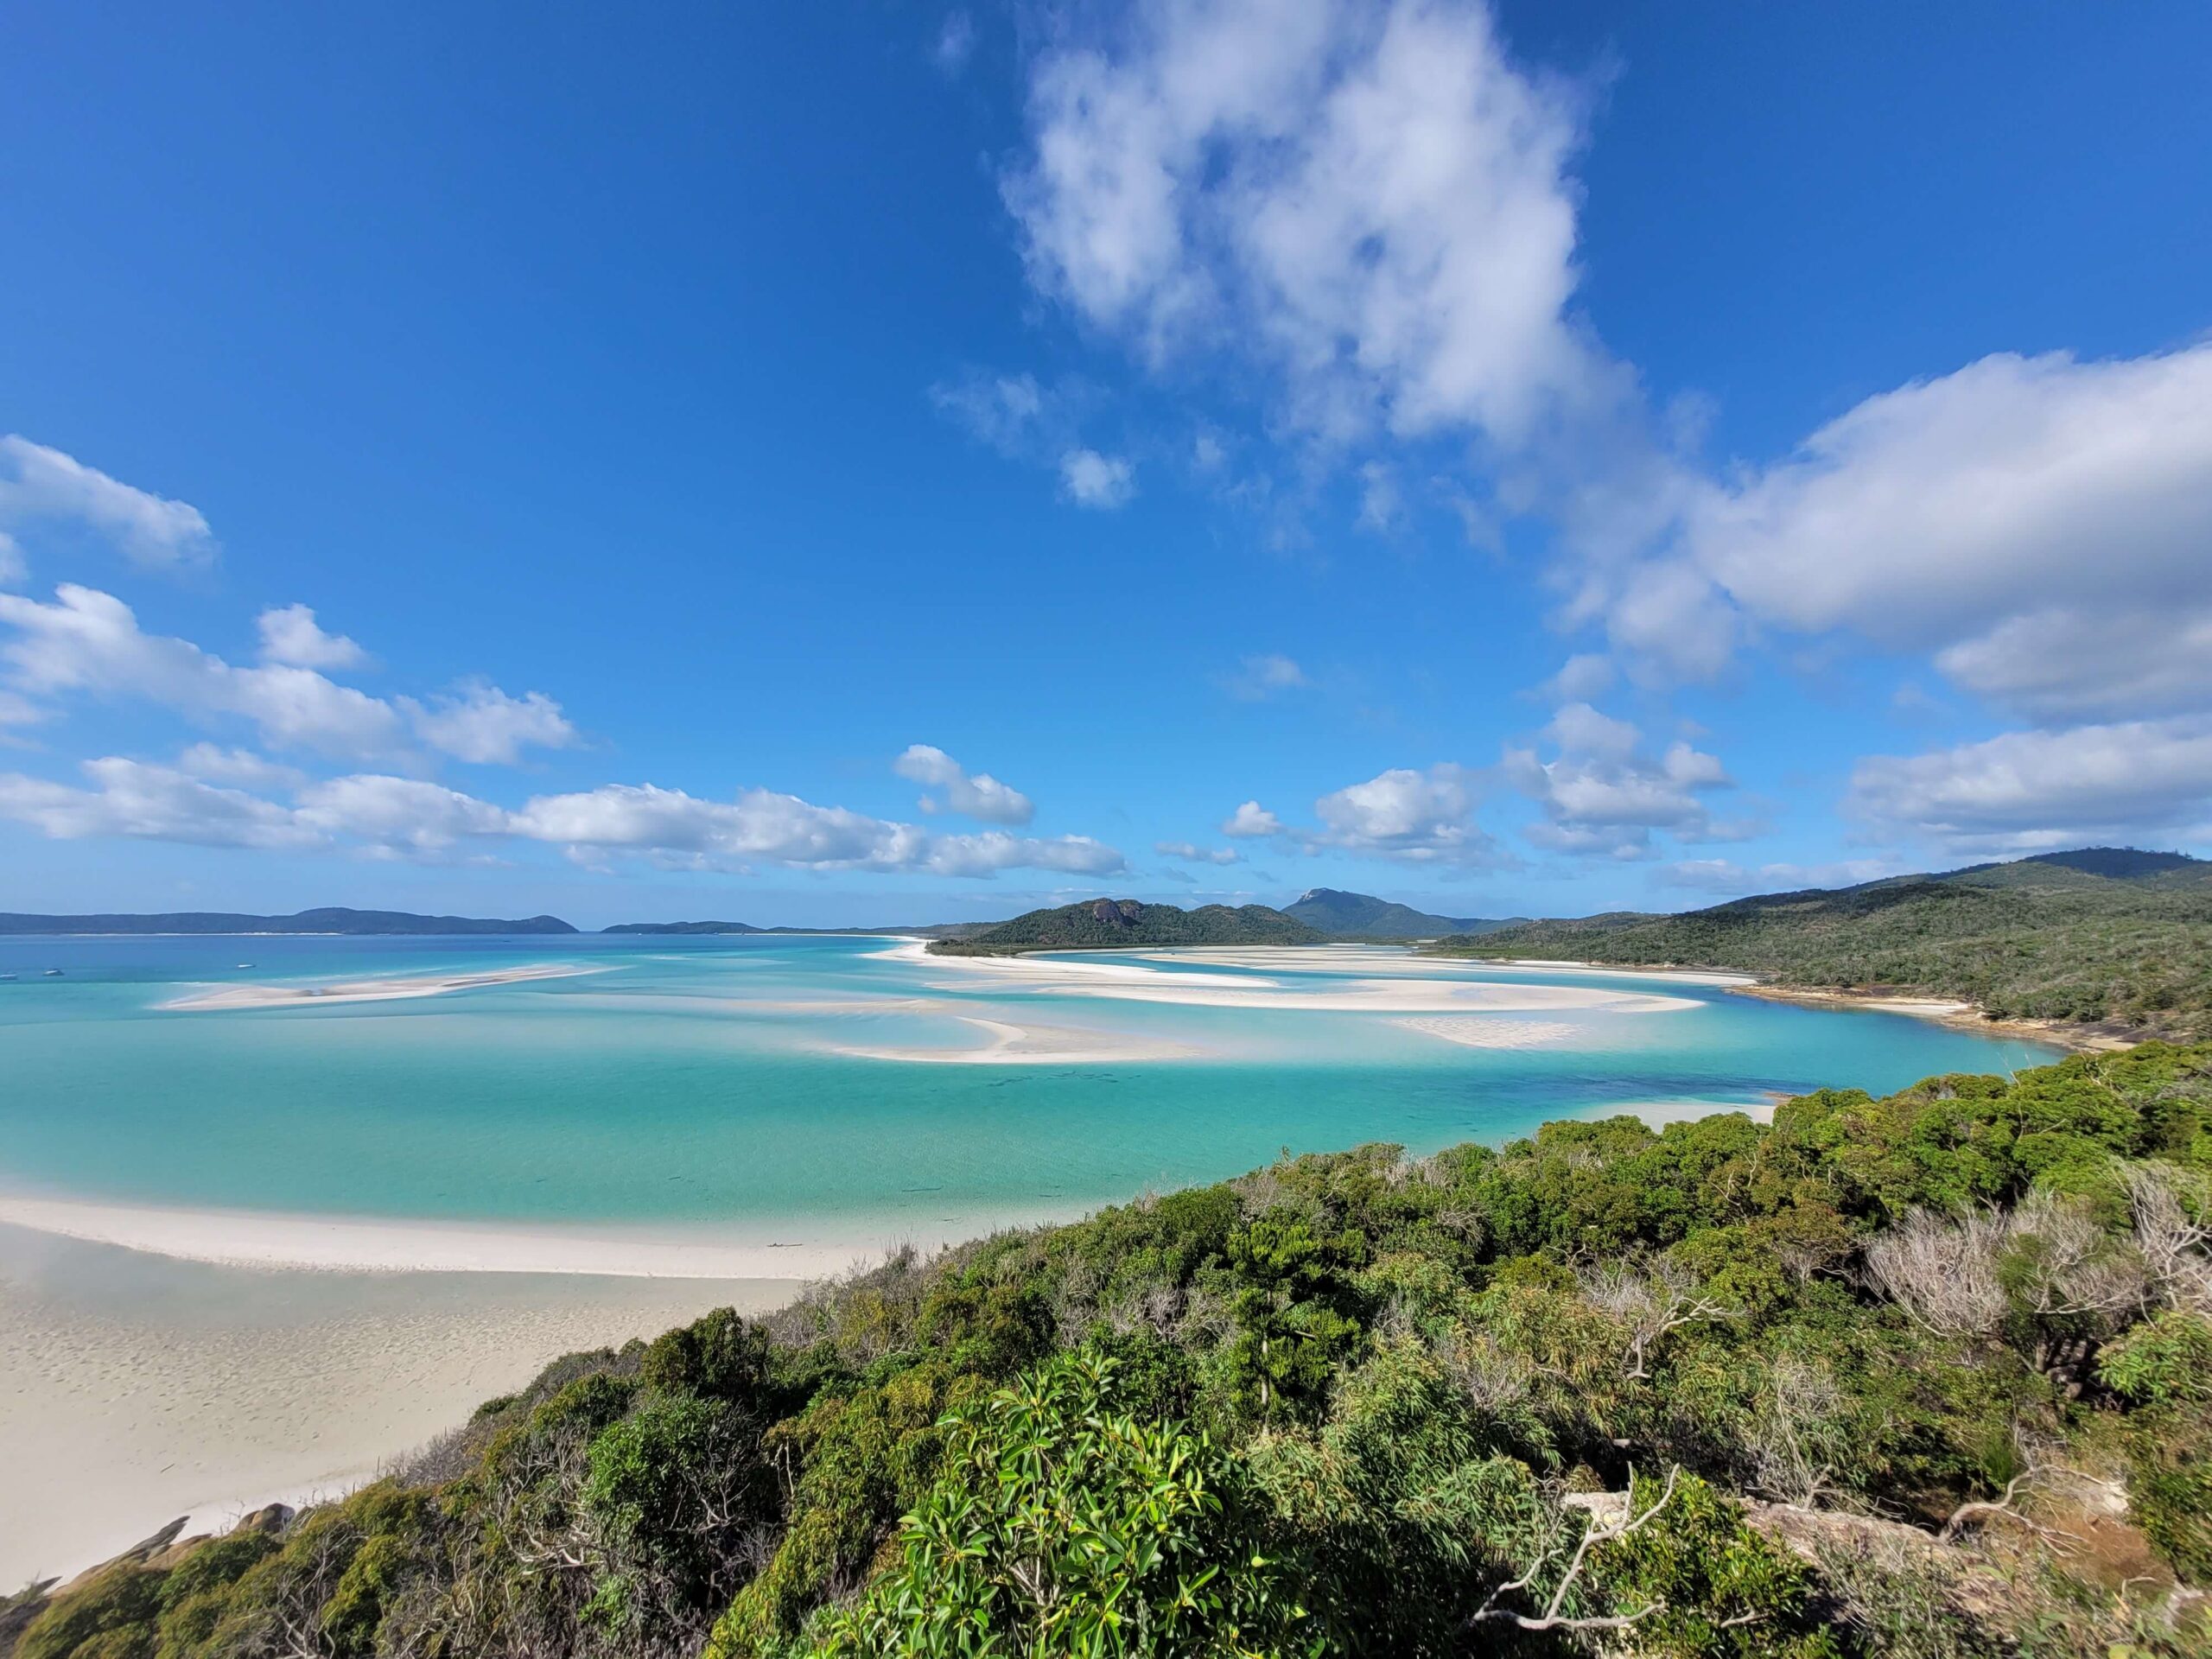 Whitehaven Beach, the Whitsundays, from Hill Inlet Lookout. Photo taken by Sam.